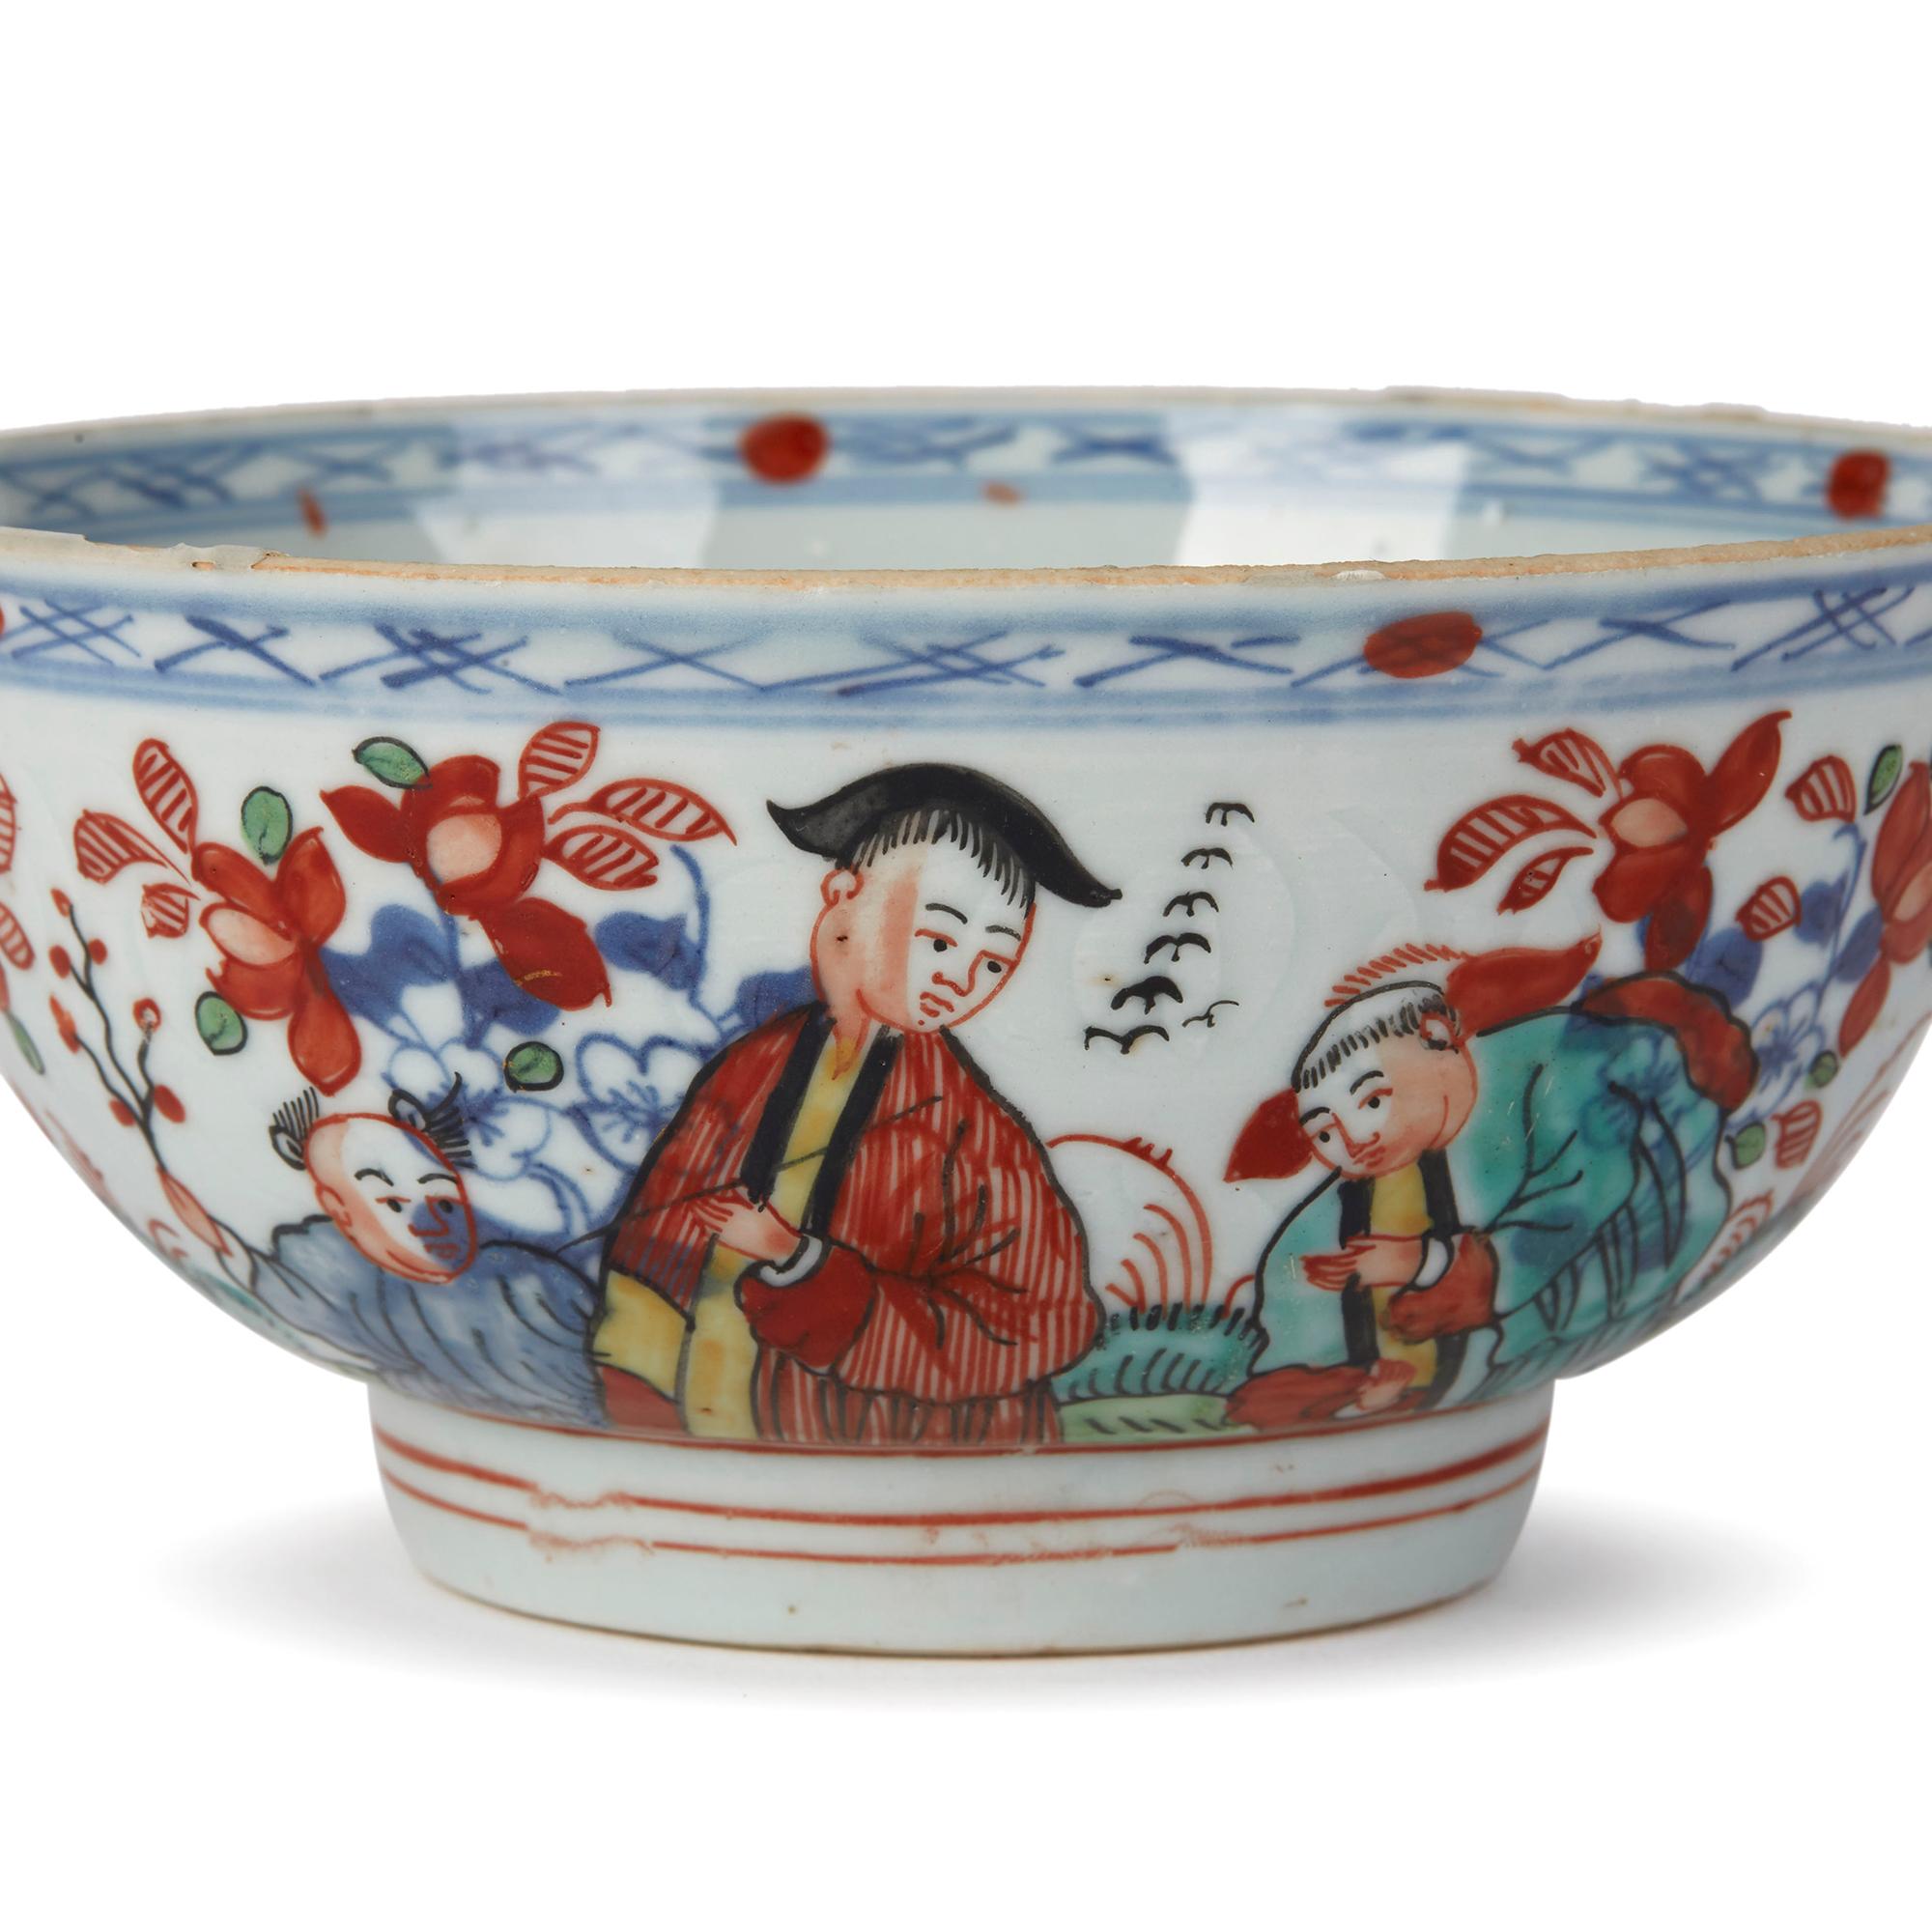 18th Century and Earlier Chinese Qianlong Overdecorated Porcelain Bowl, 18th Century